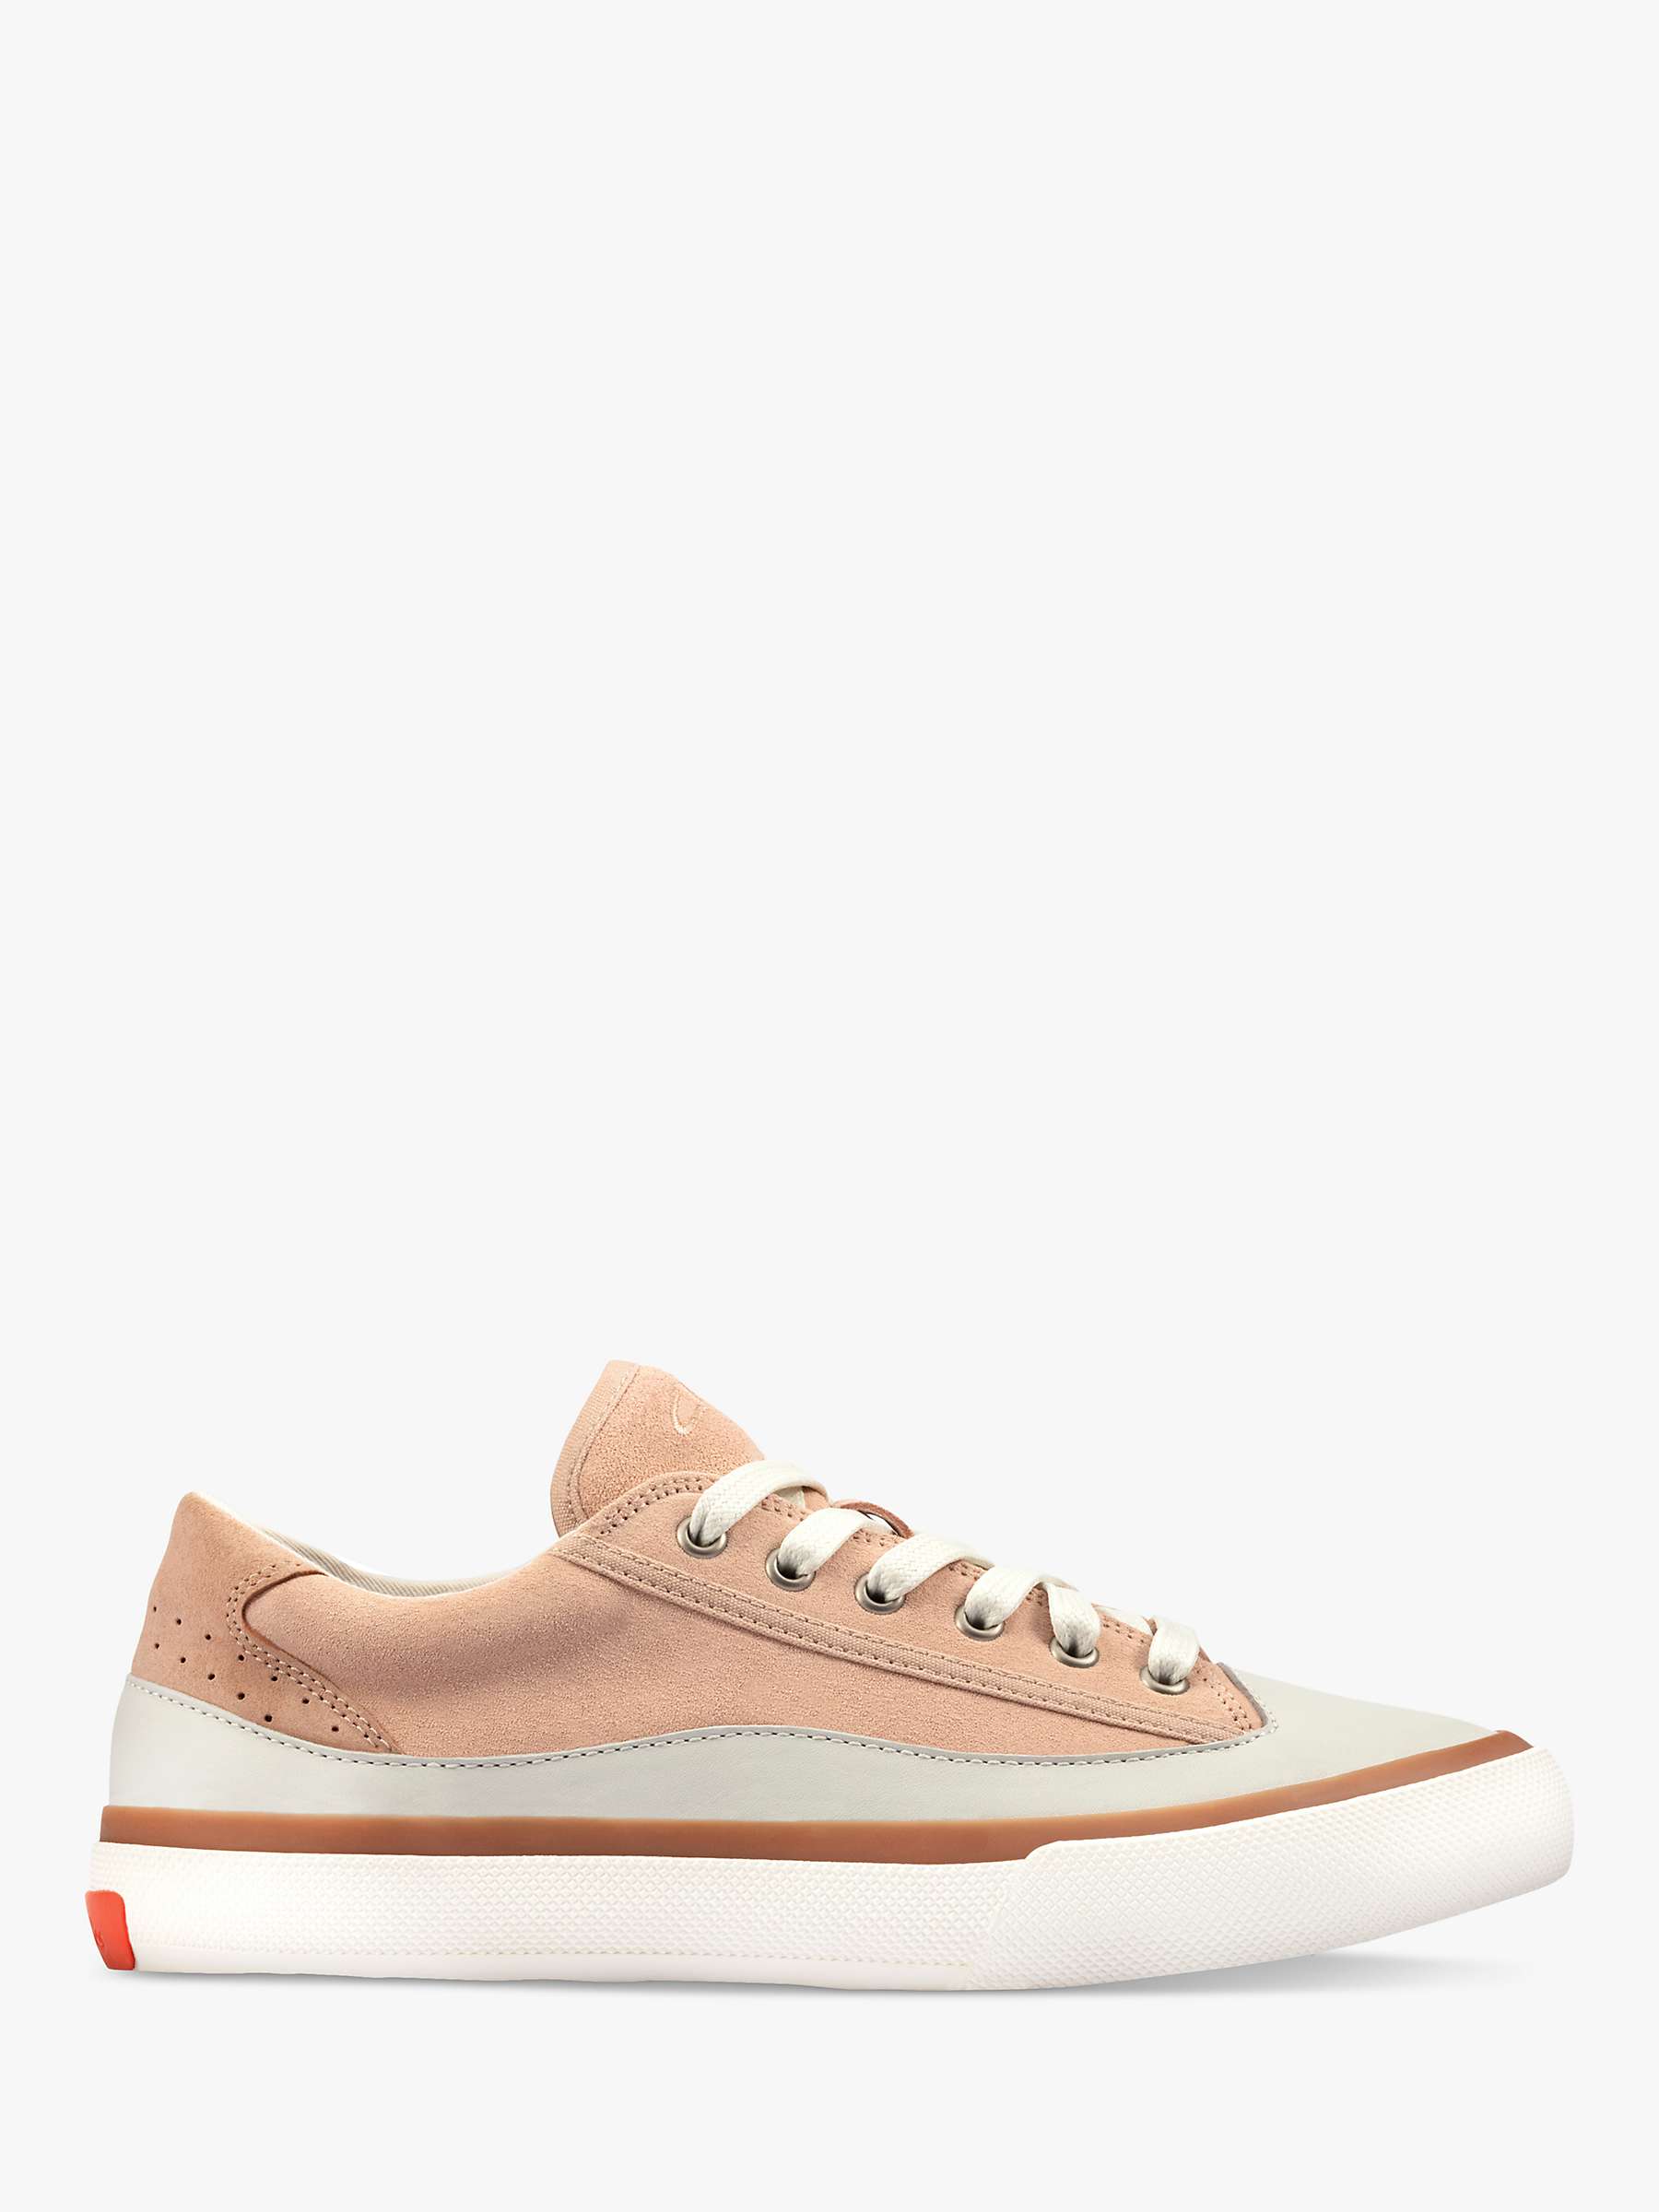 Buy Clarks Aceley Suede Lace Up Trainers, Light Pink Online at johnlewis.com